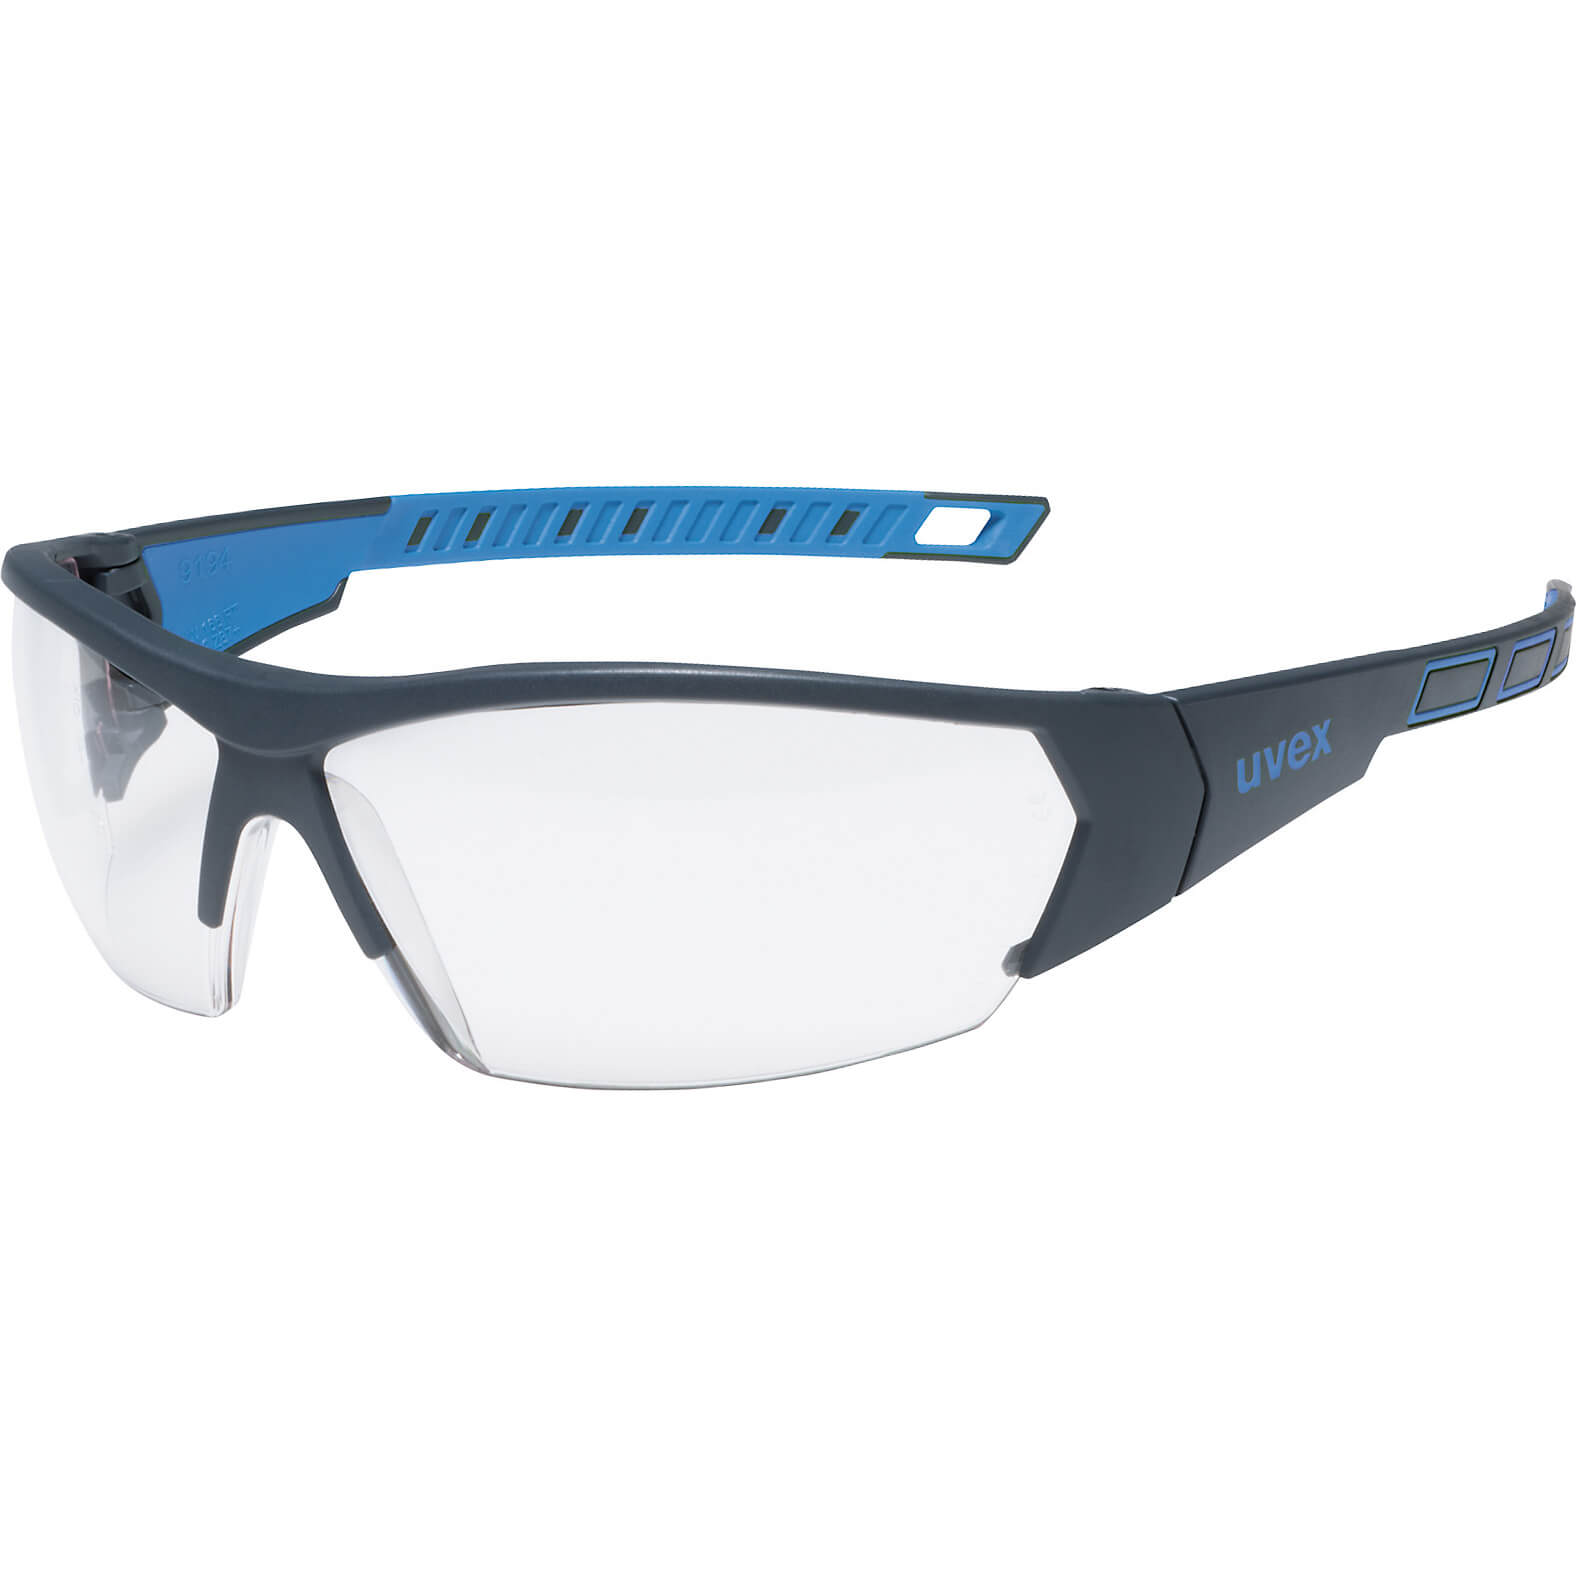 Photo of Uvex I-works Safety Glasses Anthracite Clear